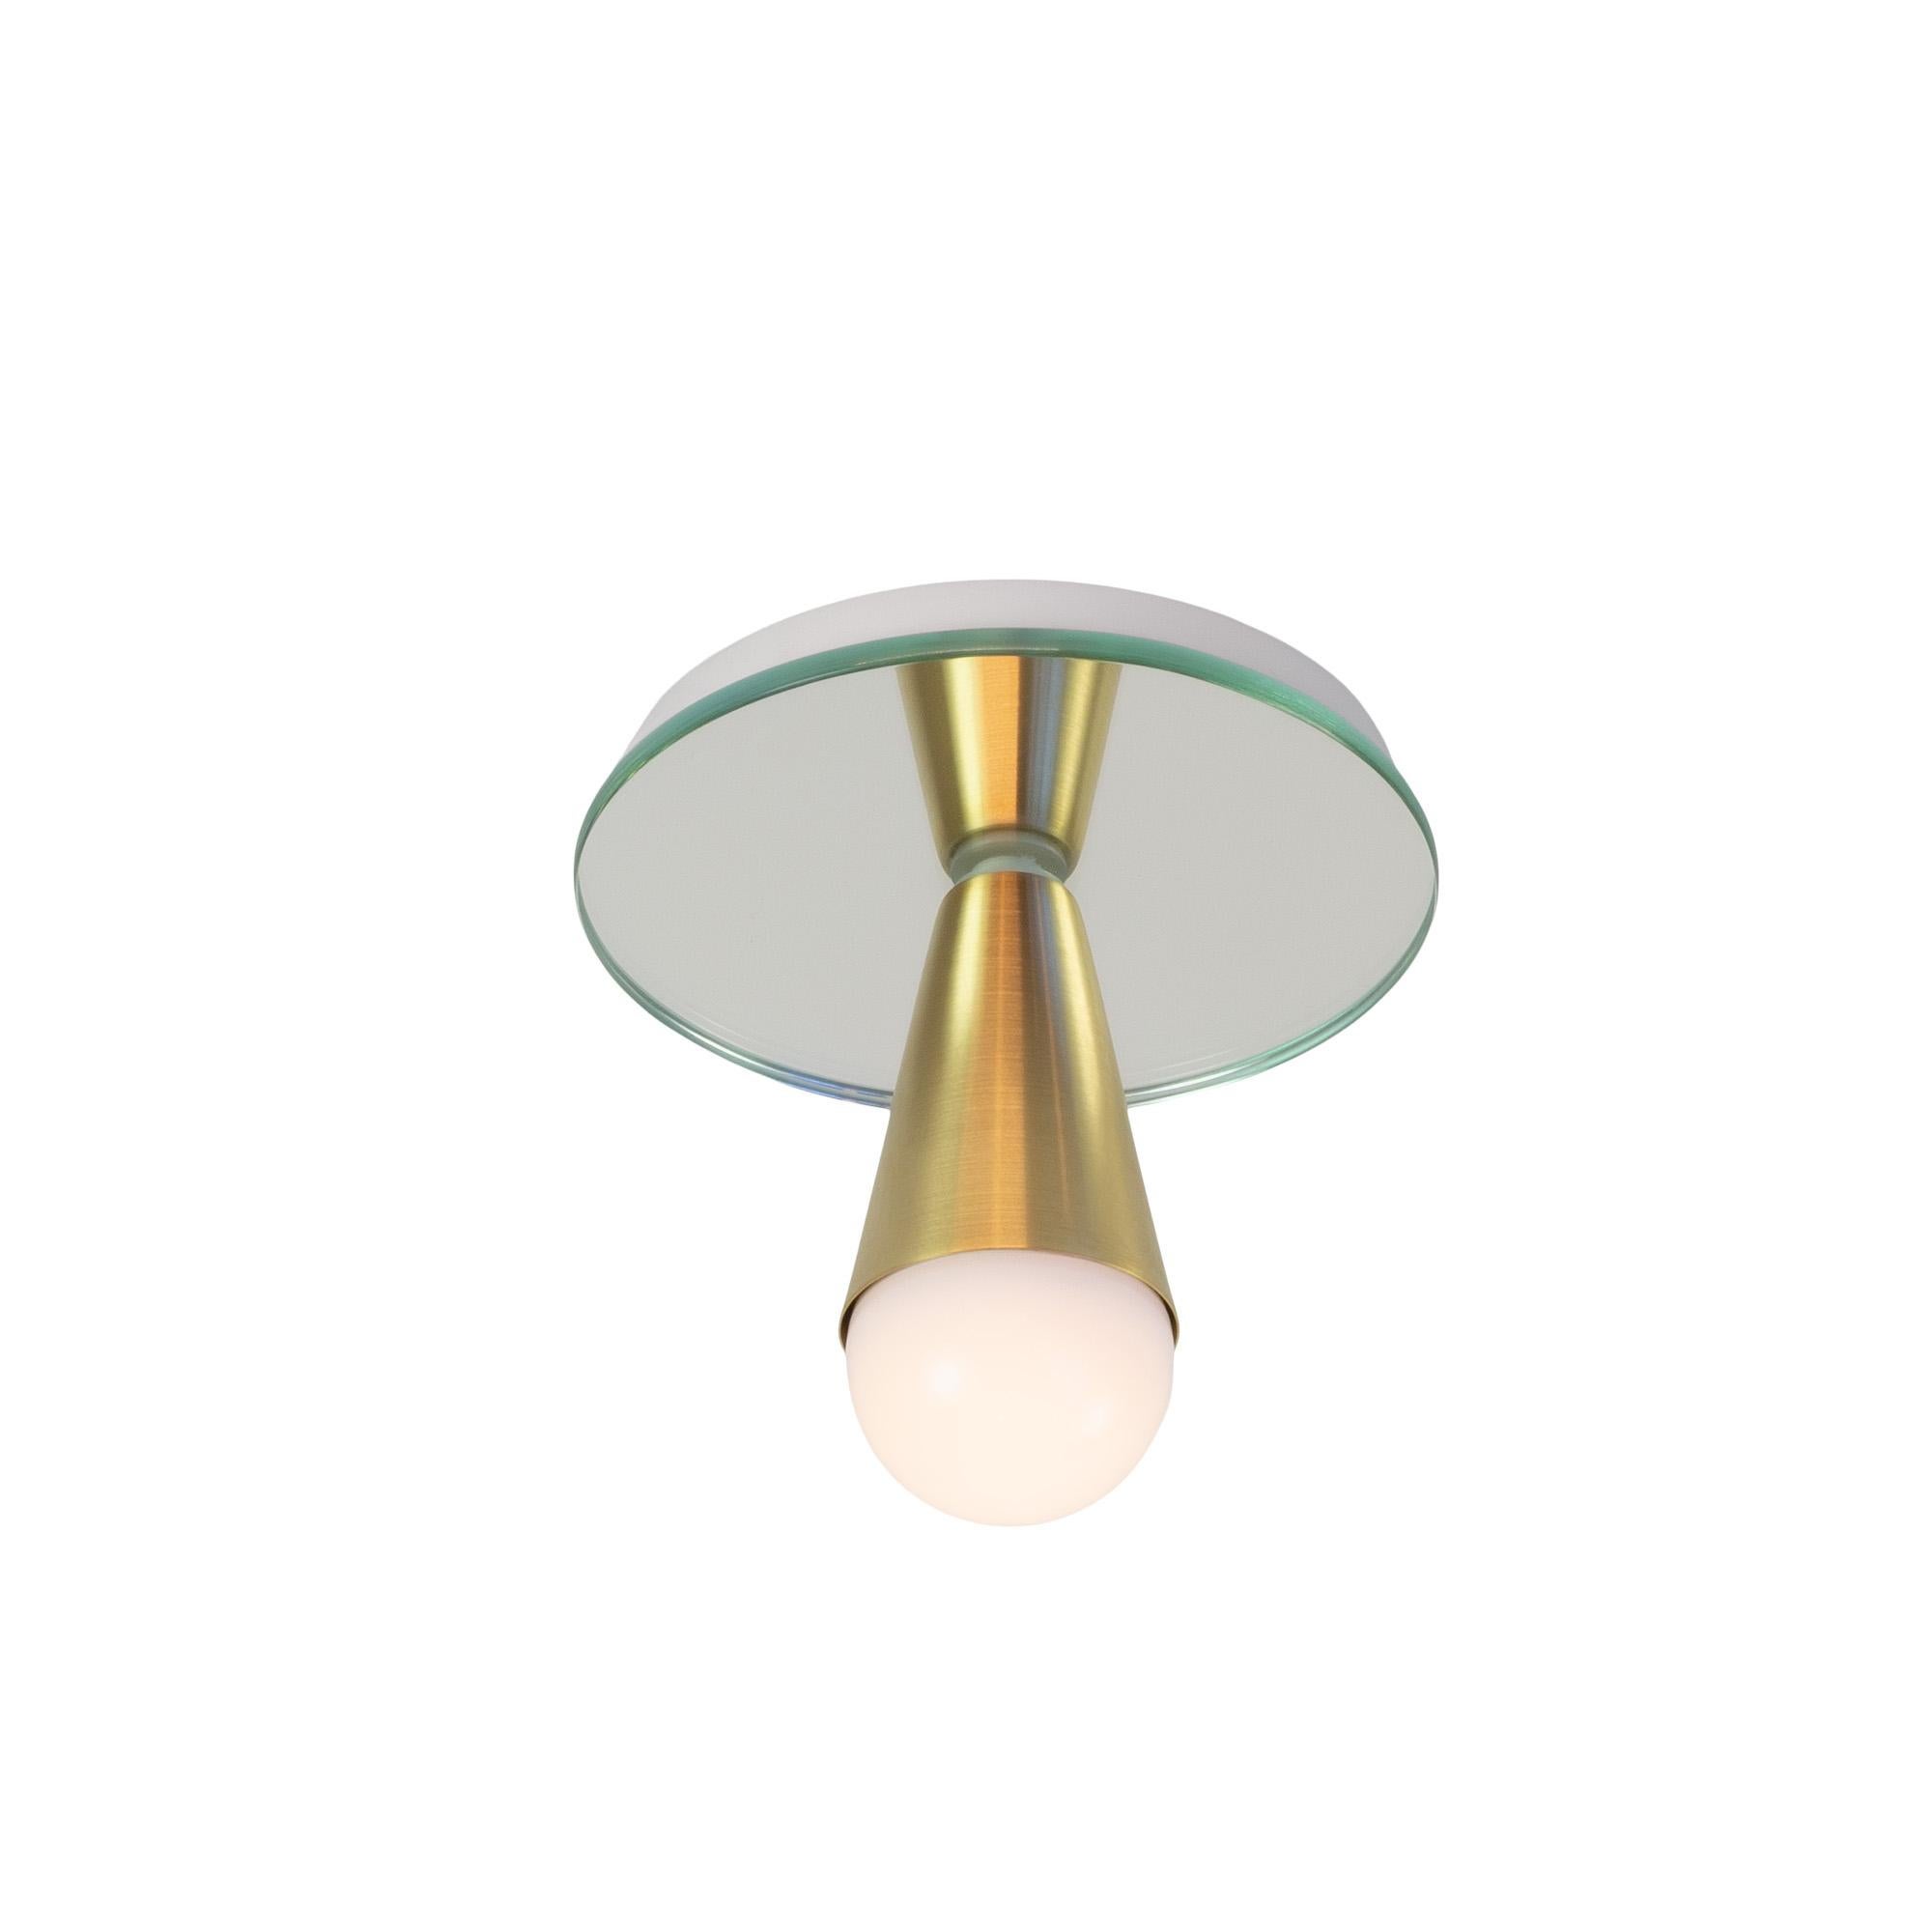 This listing is for a set of four the Echo One Flush Mounts. They also work well as sconces.

Simple, elegant and playful, the Echo Series is a line of surface-mount fixtures that can be used on a wall or ceiling. White or brass cones mount to